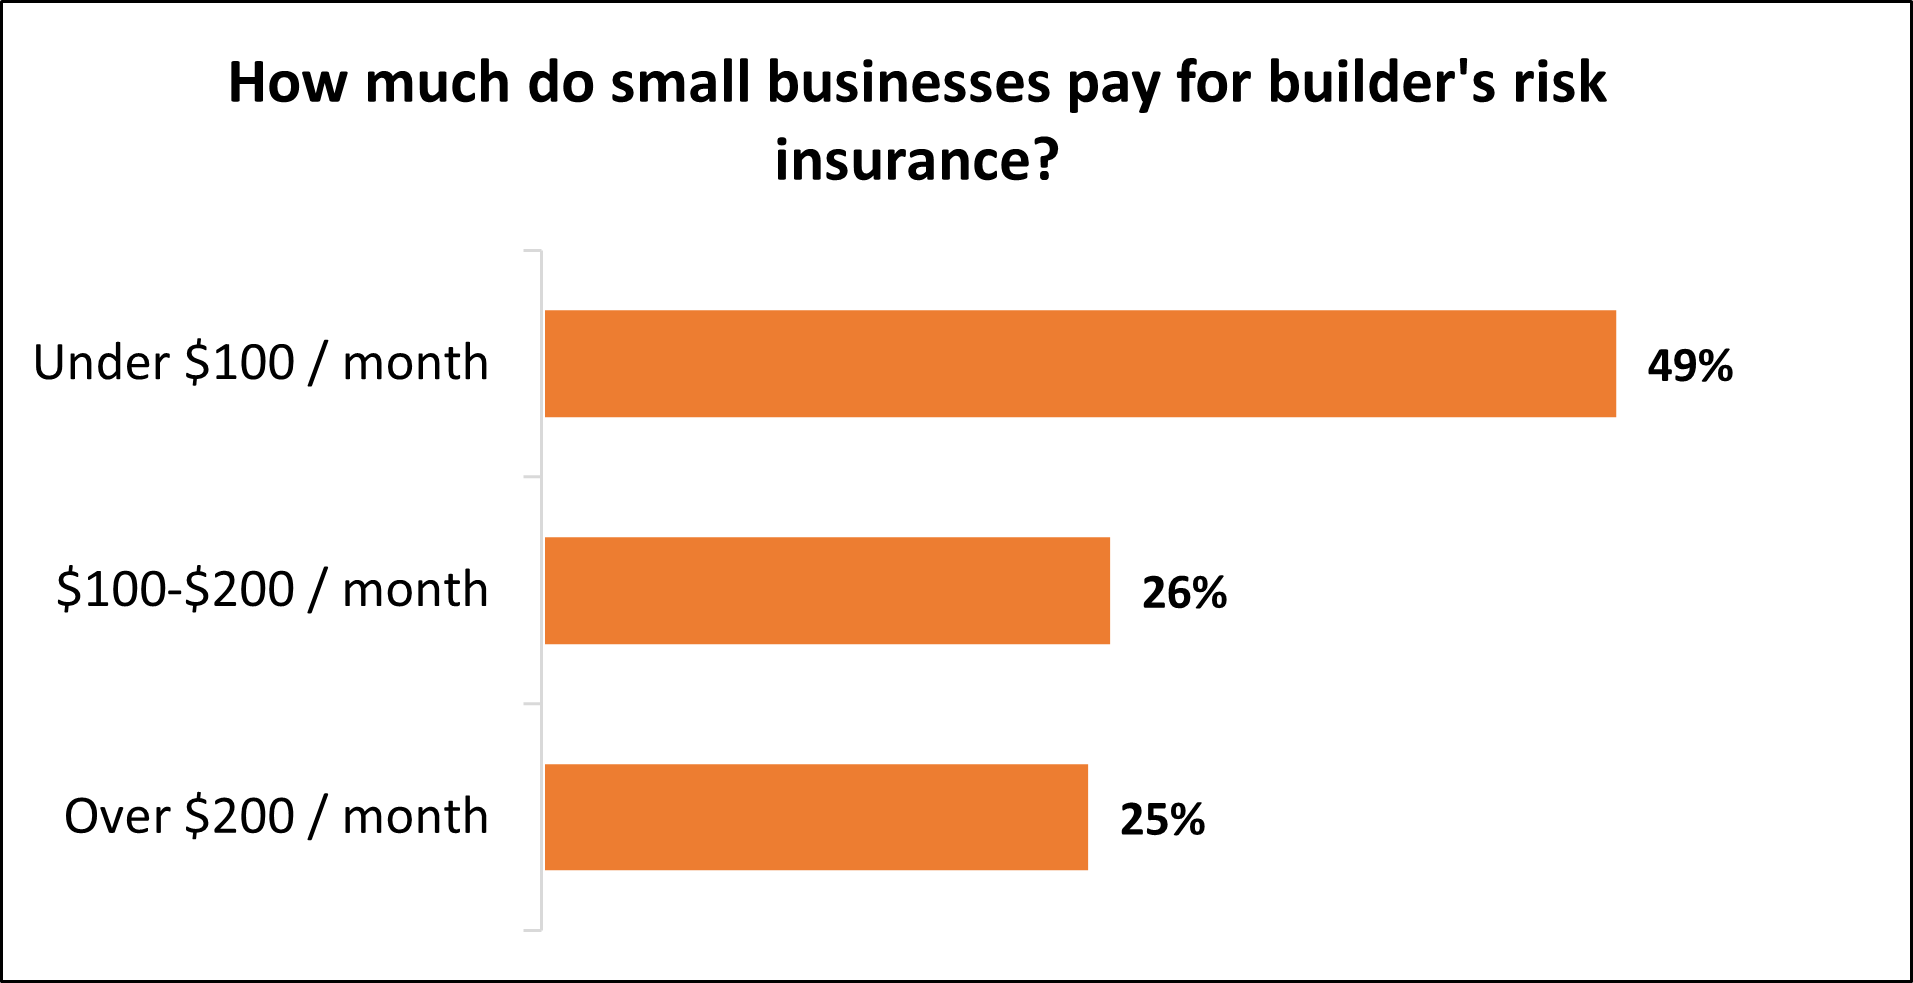 How much do small businesses pay for builder's risk insurance?